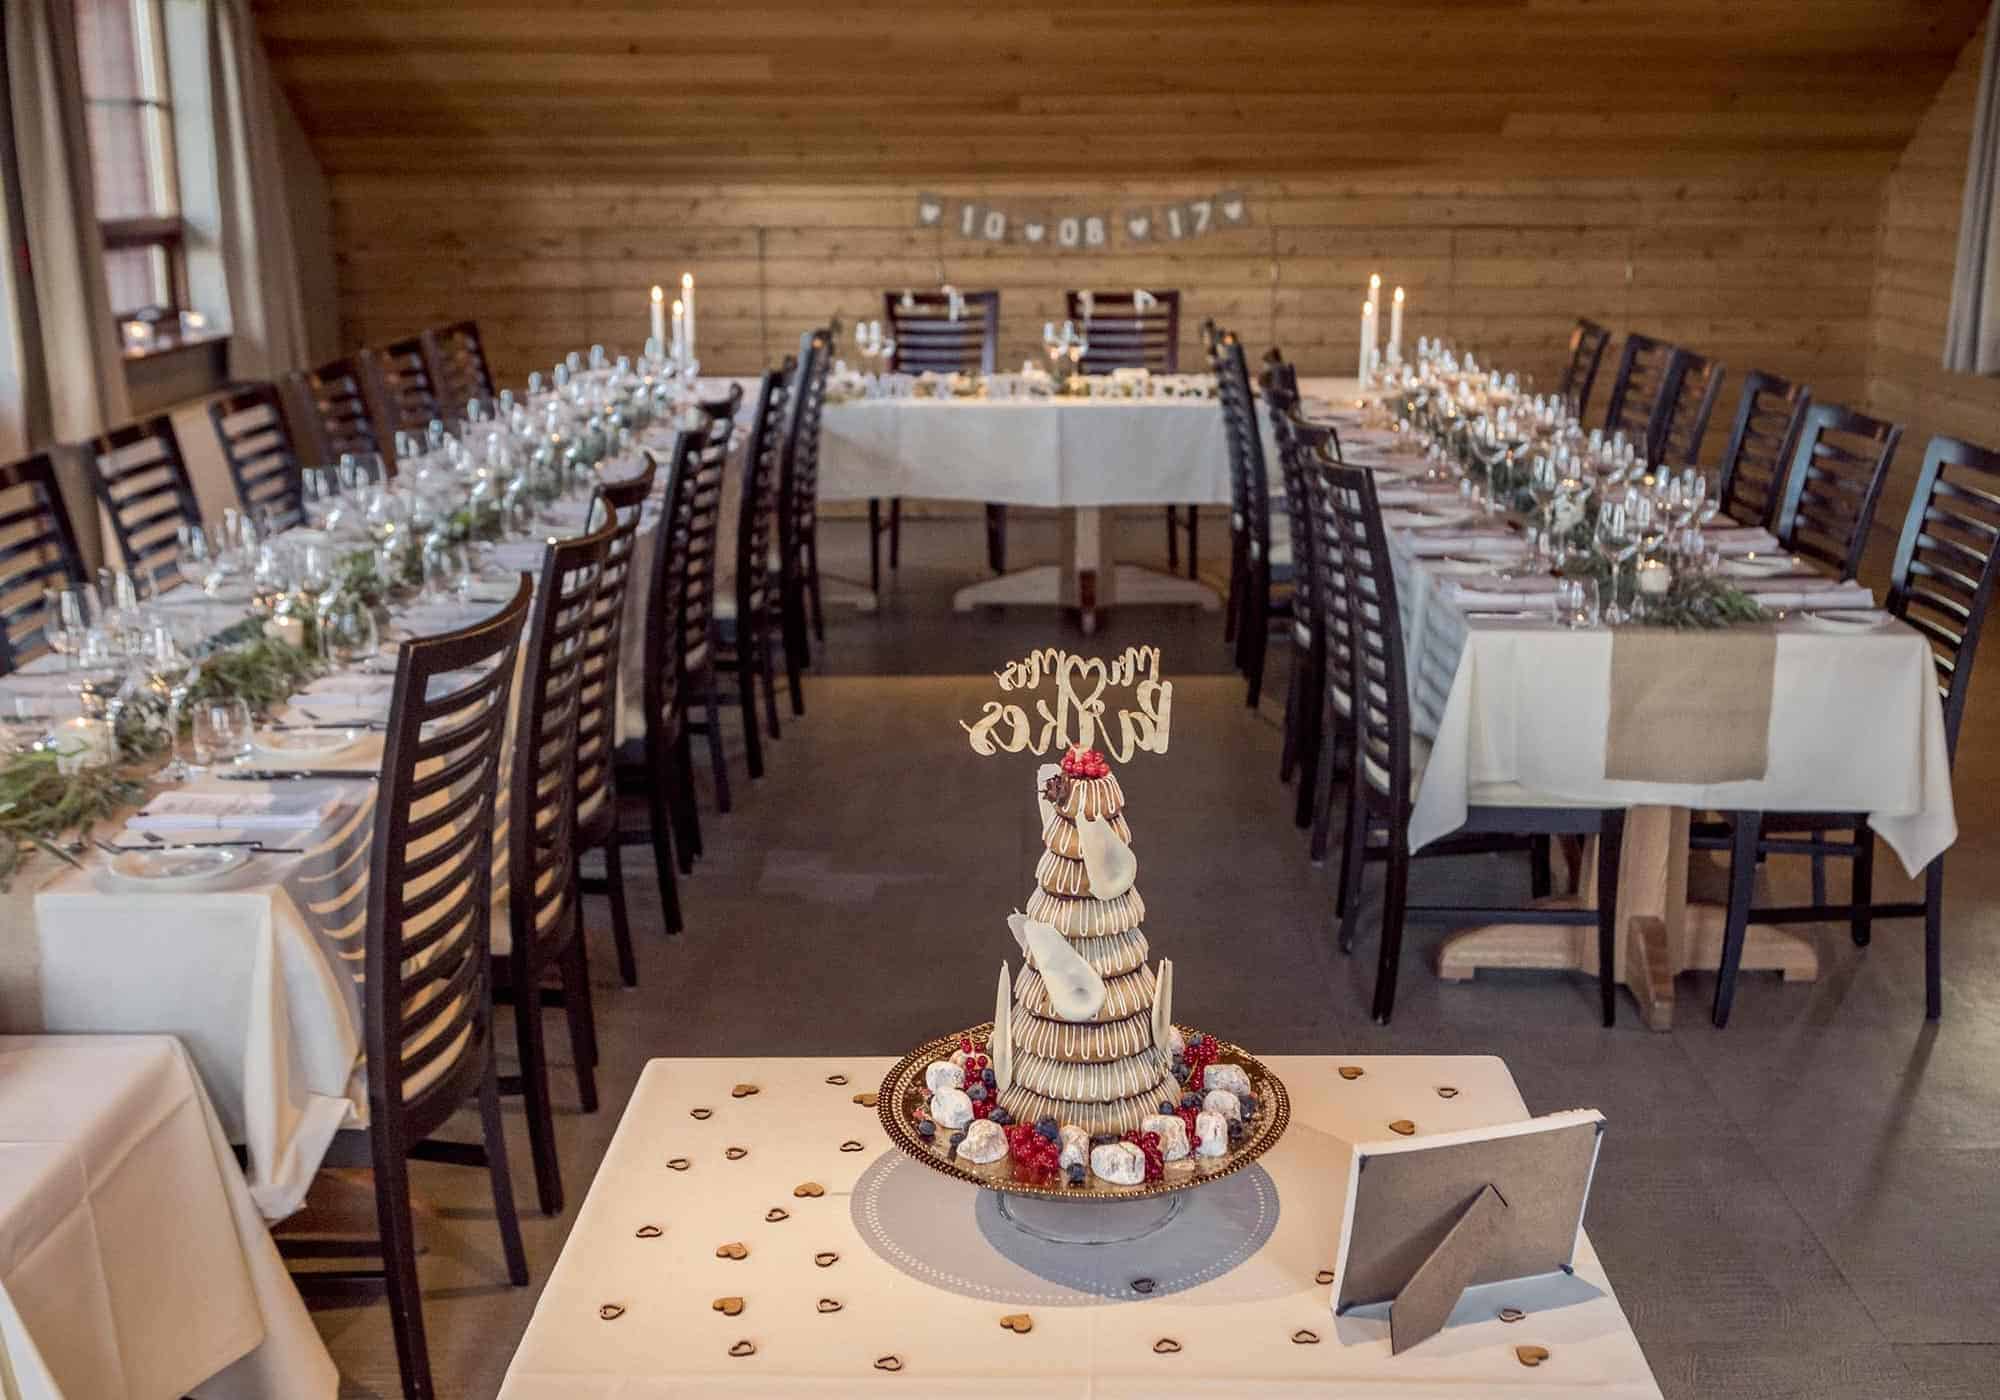 Tables set up in a u-shape in Hotel Rangá's River Hall with wedding decorations and a kransakaka wedding cake.